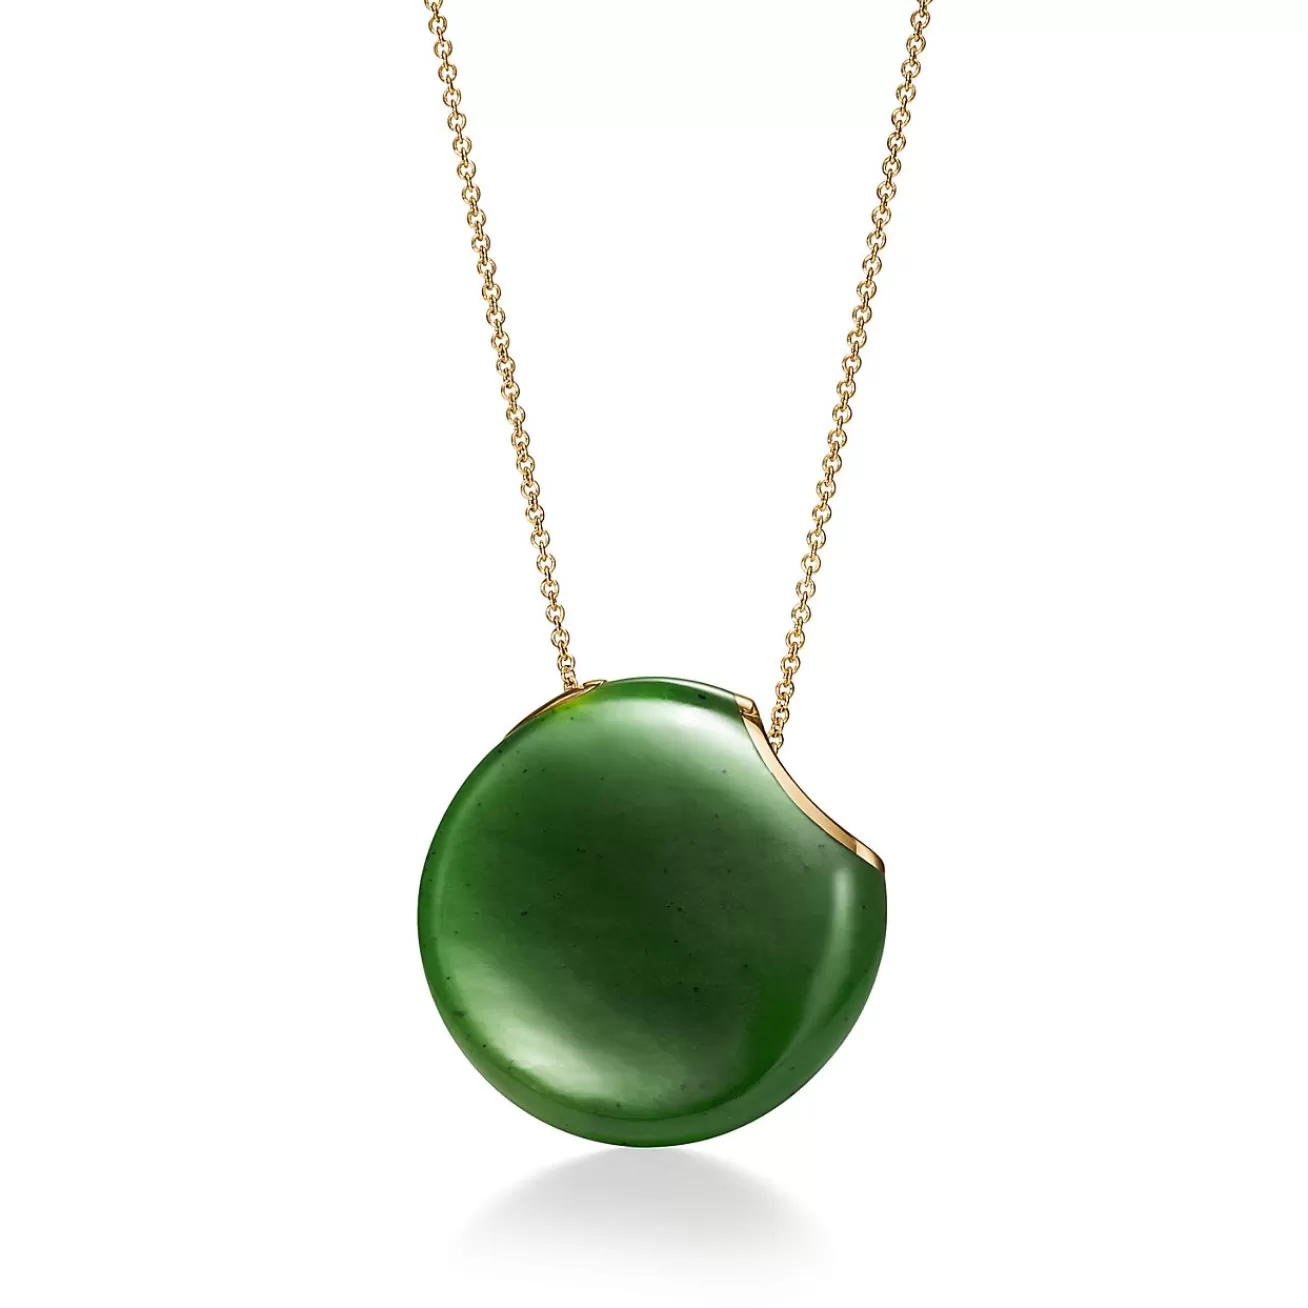 Tiffany & Co. Elsa Peretti® Touchstone Pendant in Green Jade and Yellow Gold | ^ Necklaces & Pendants | New Jewelry